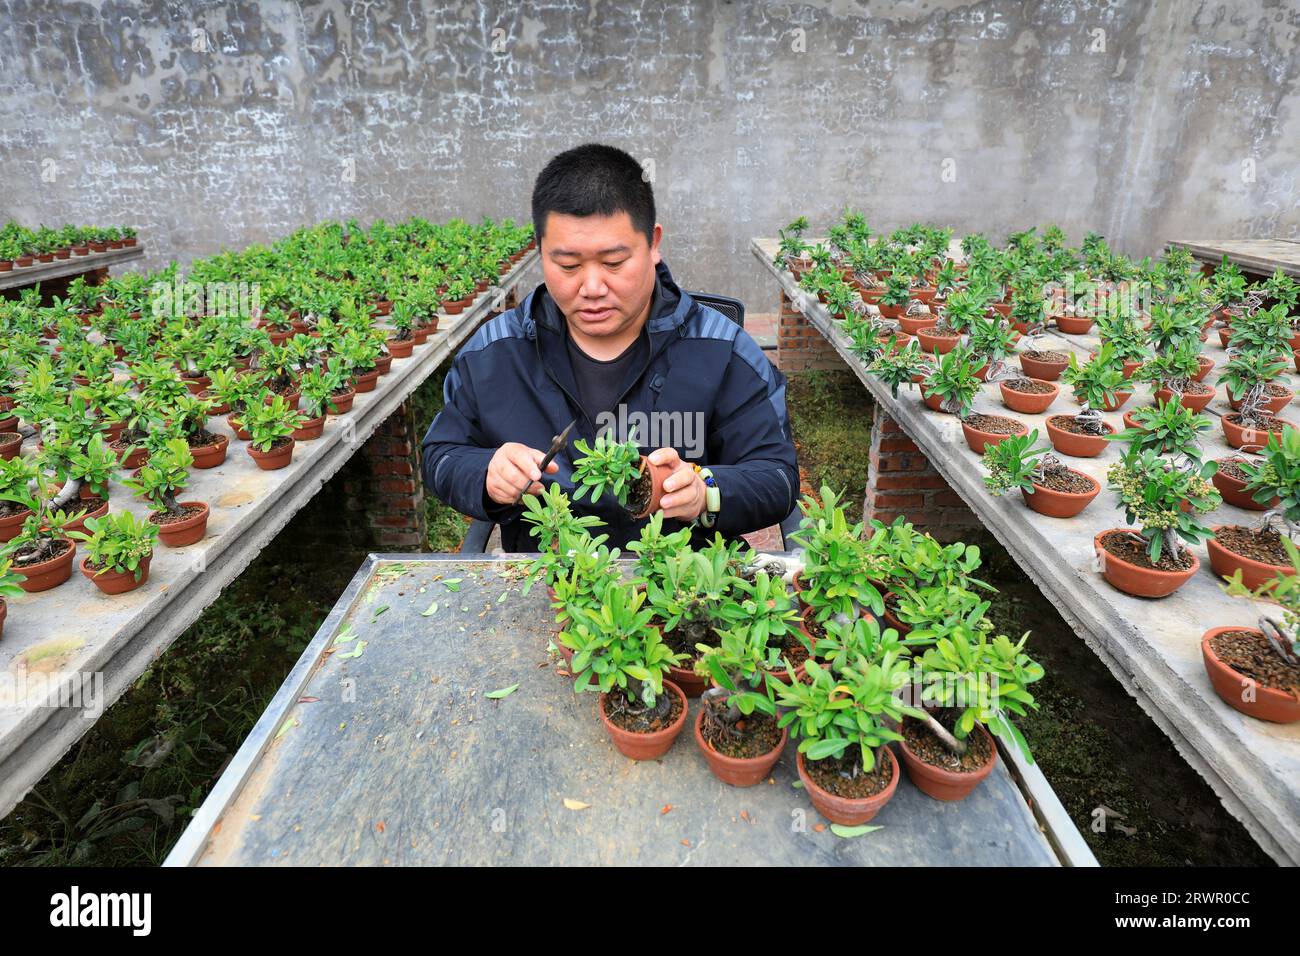 LUANNAN COUNTY, China - May 10, 2022: A gardener is pruning the bonsai of Pyracantha in a nursery, North China Stock Photo